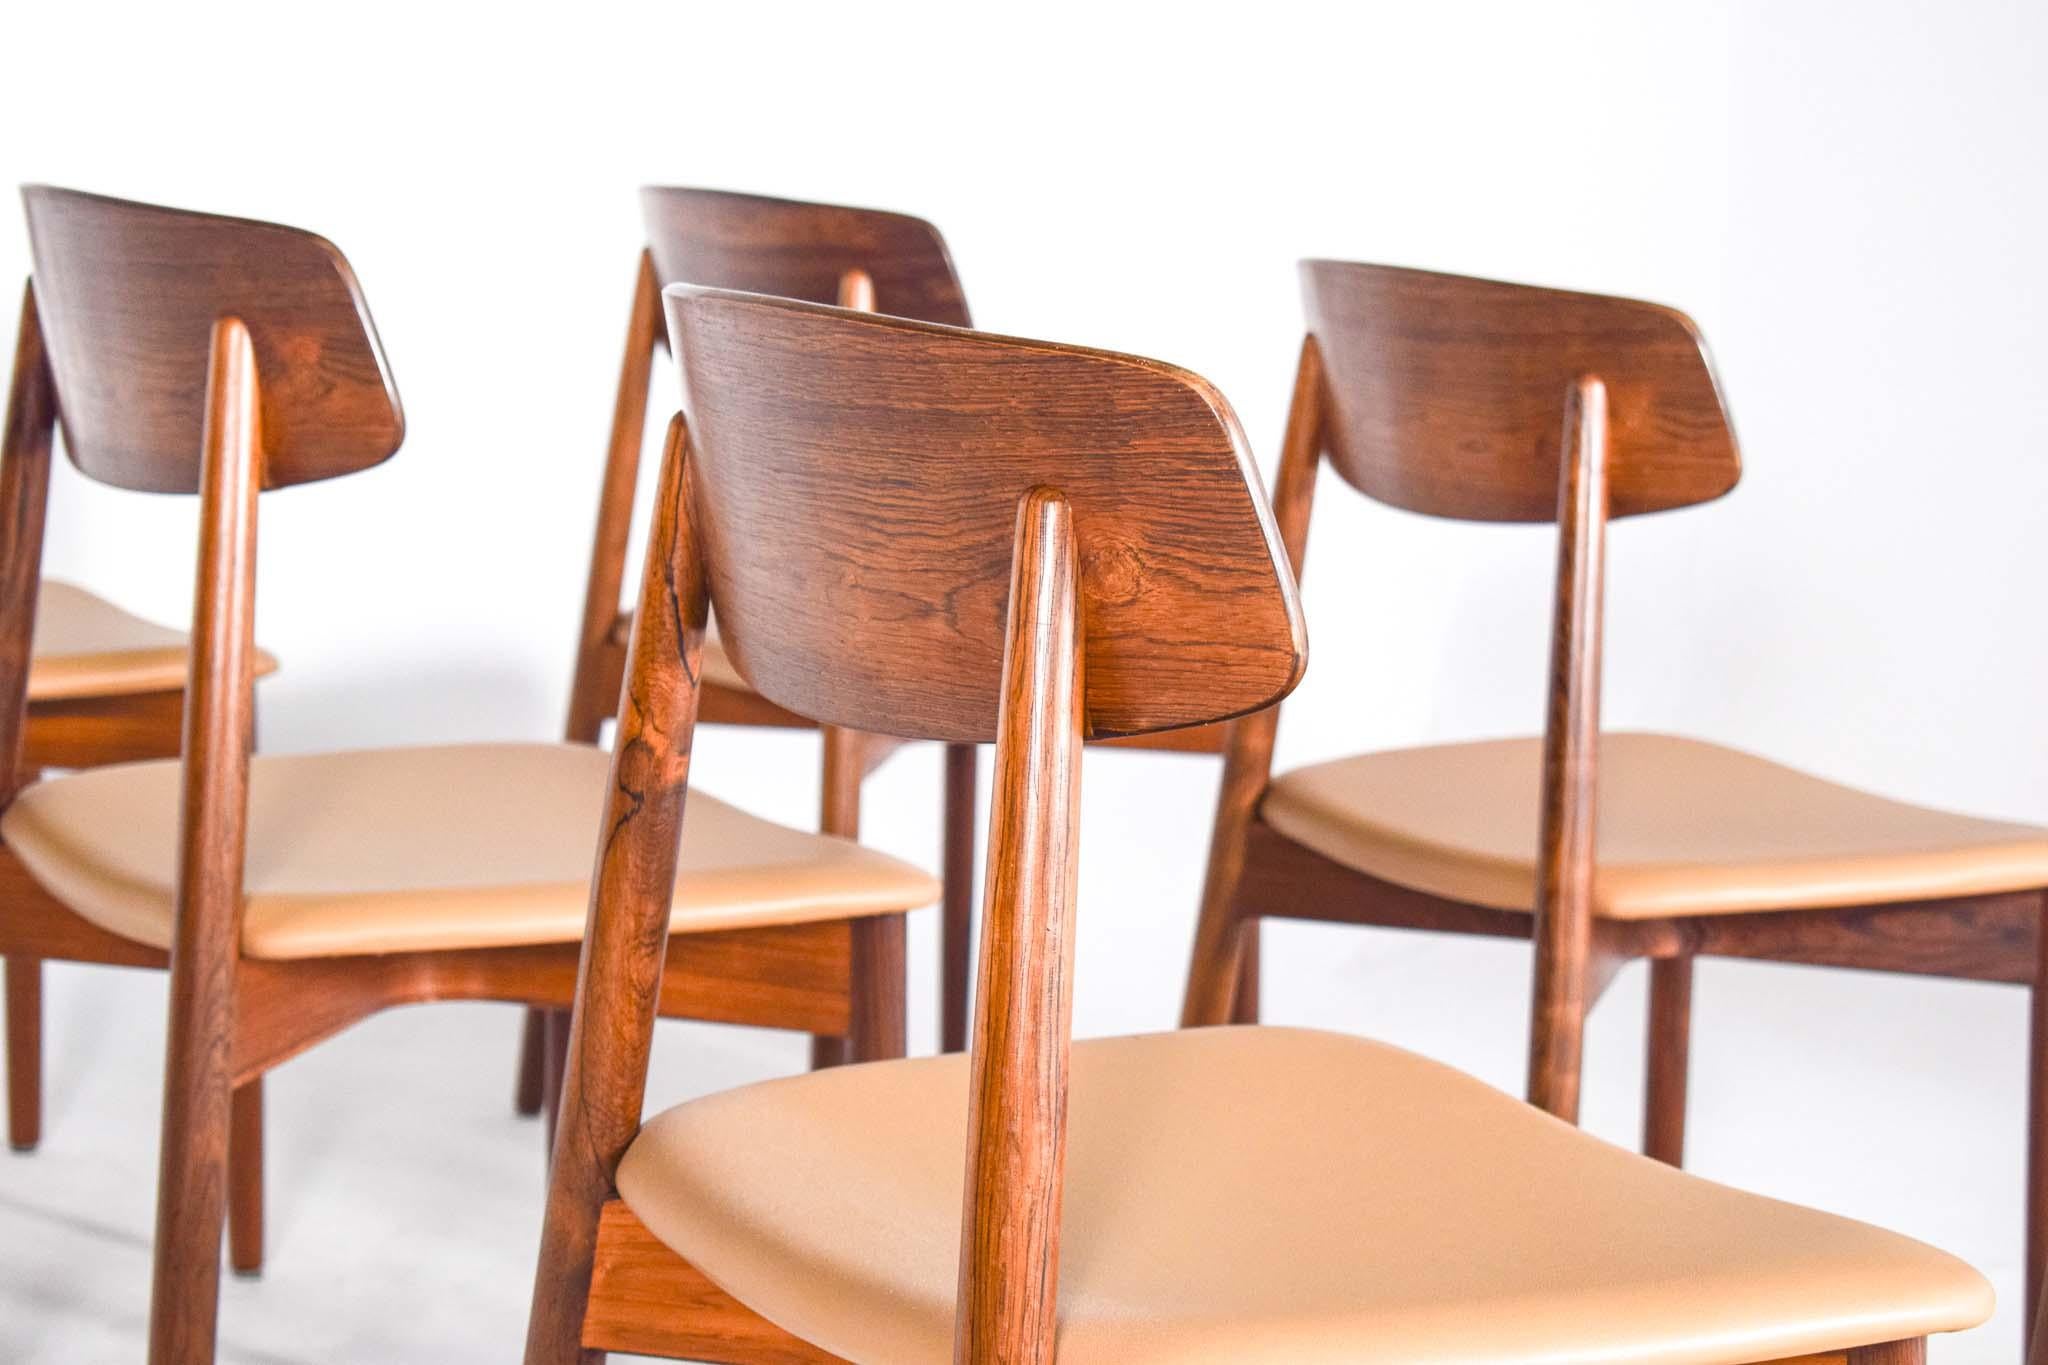 Mid-20th Century Rosewood Dining Chairs by Harry Østergaard for Randers Møbelfabrik, 1960s For Sale